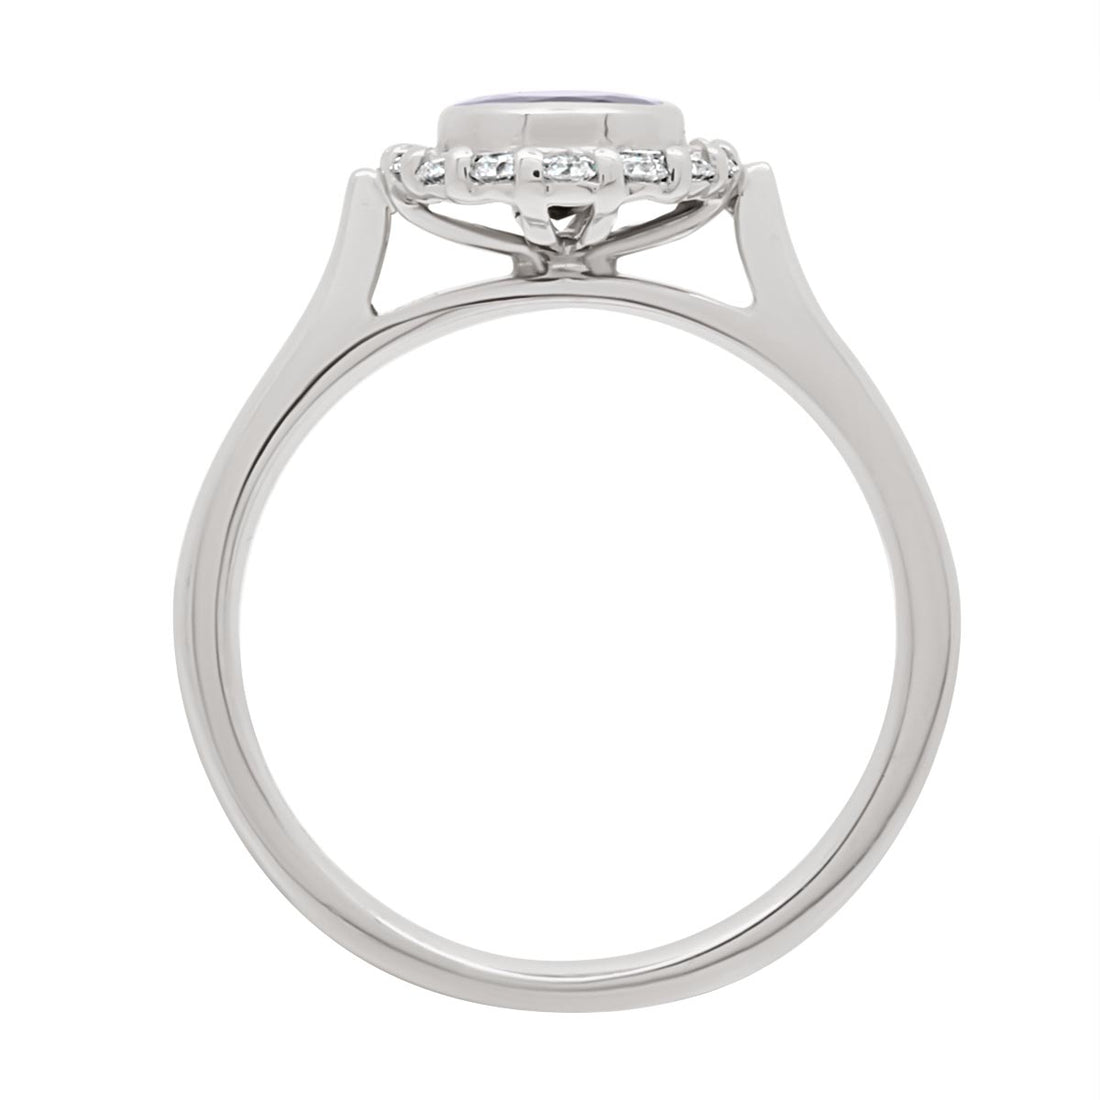 Sapphire Bezel Engagement Ring in white gold standing vertical